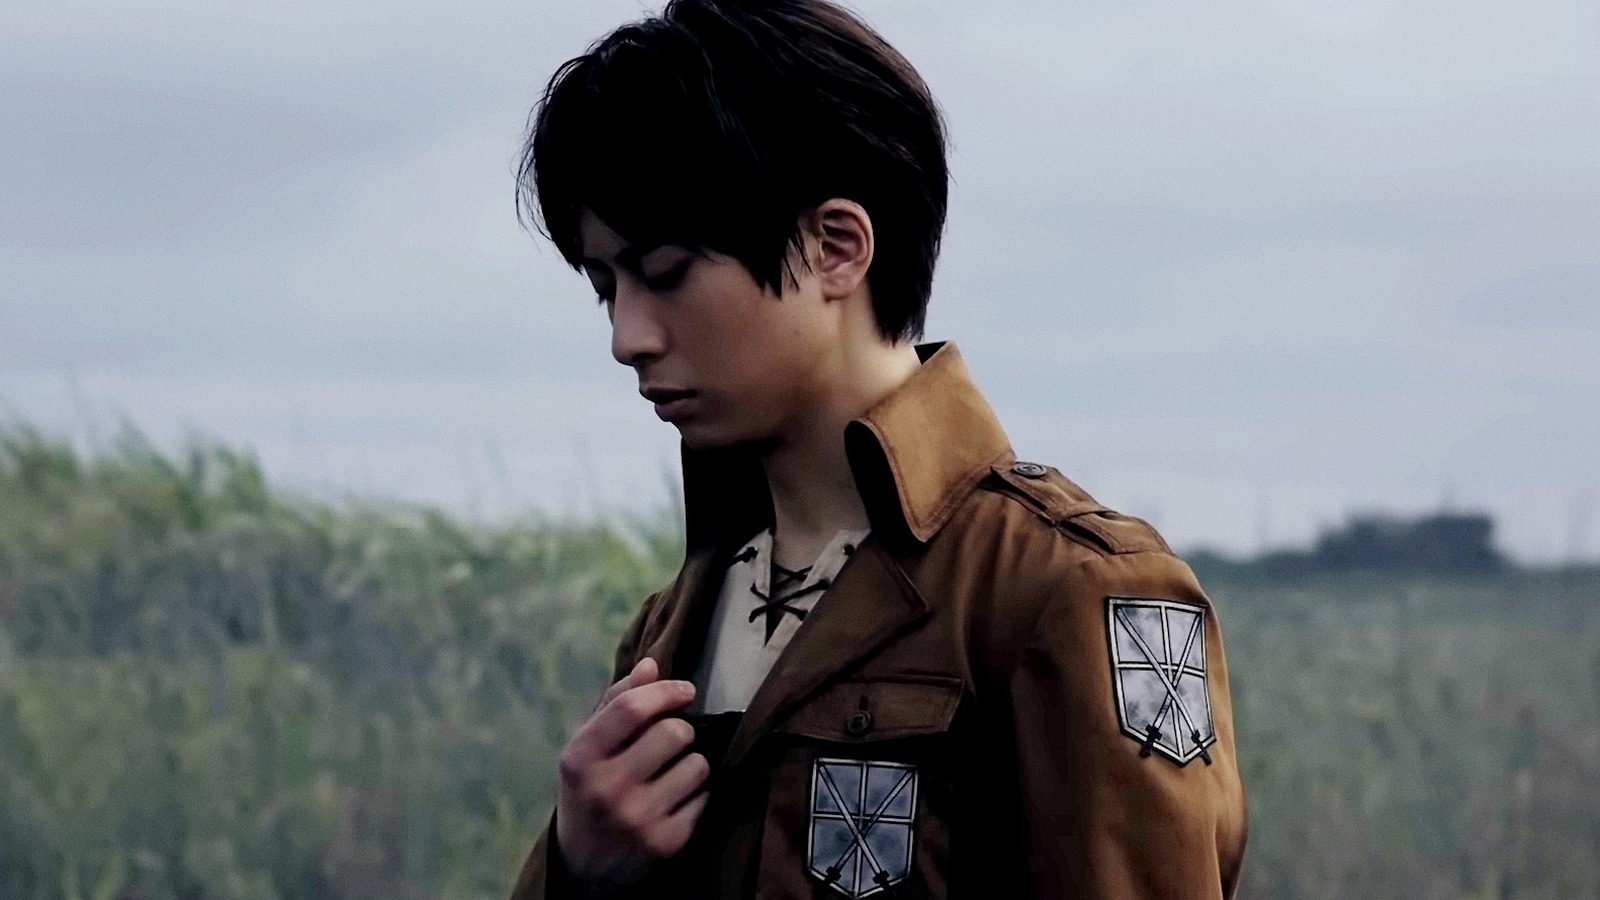 Attack On Titan Gets A Stage Musical Adaptation